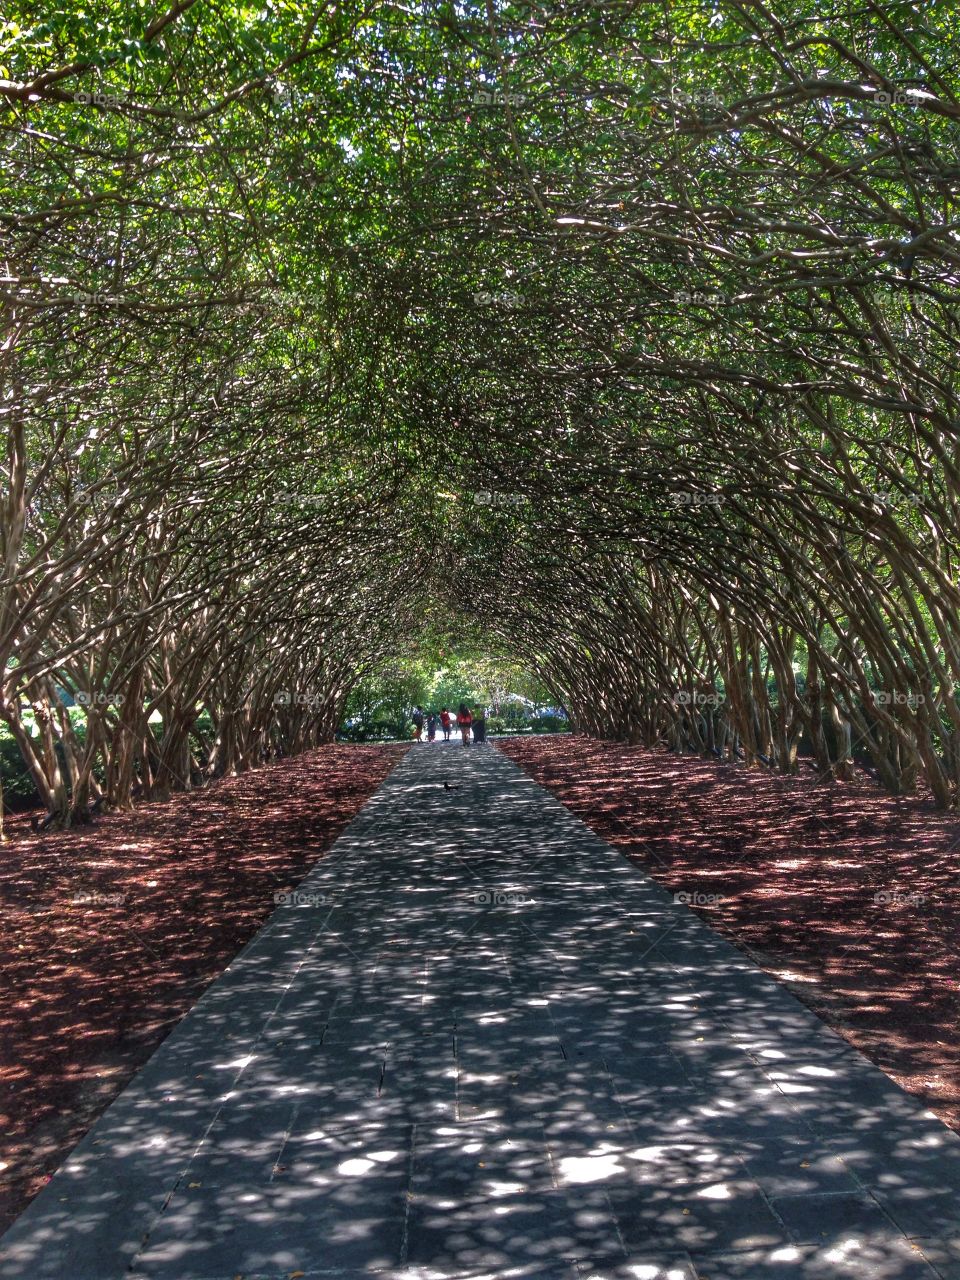 The shady tunnel. A tunnel made from trees